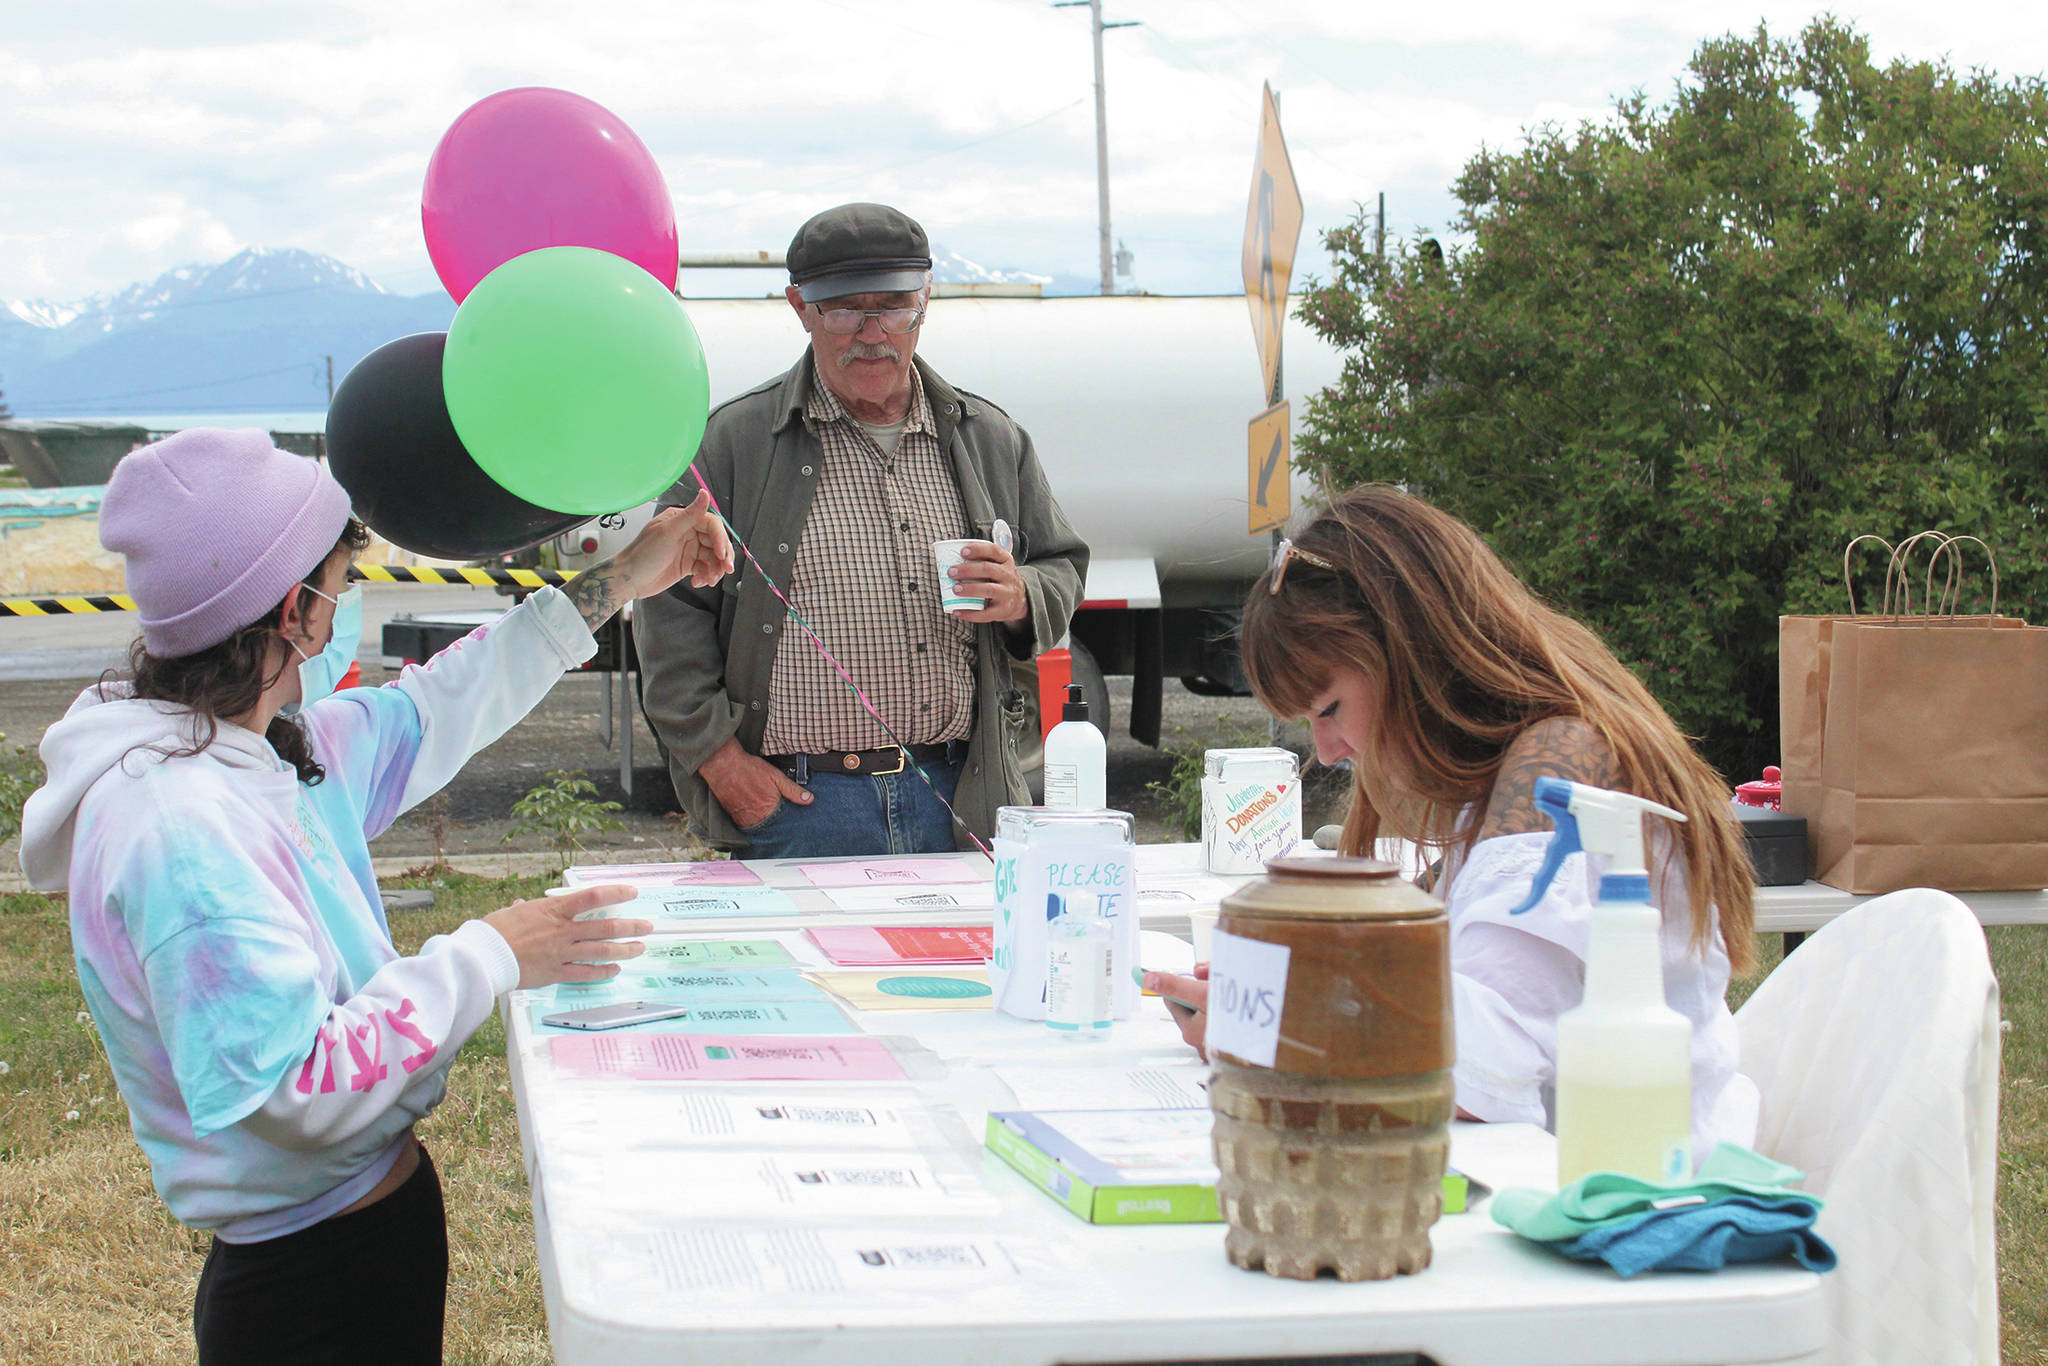 Bumppo Bremicker, center, learns about educational resources at a table at the first ever Juneteenth celebration in Homer, held Friday, June 19, 2020 at WKFL Park in Homer, Alaska. (Photo by Megan Pacer/Homer News)